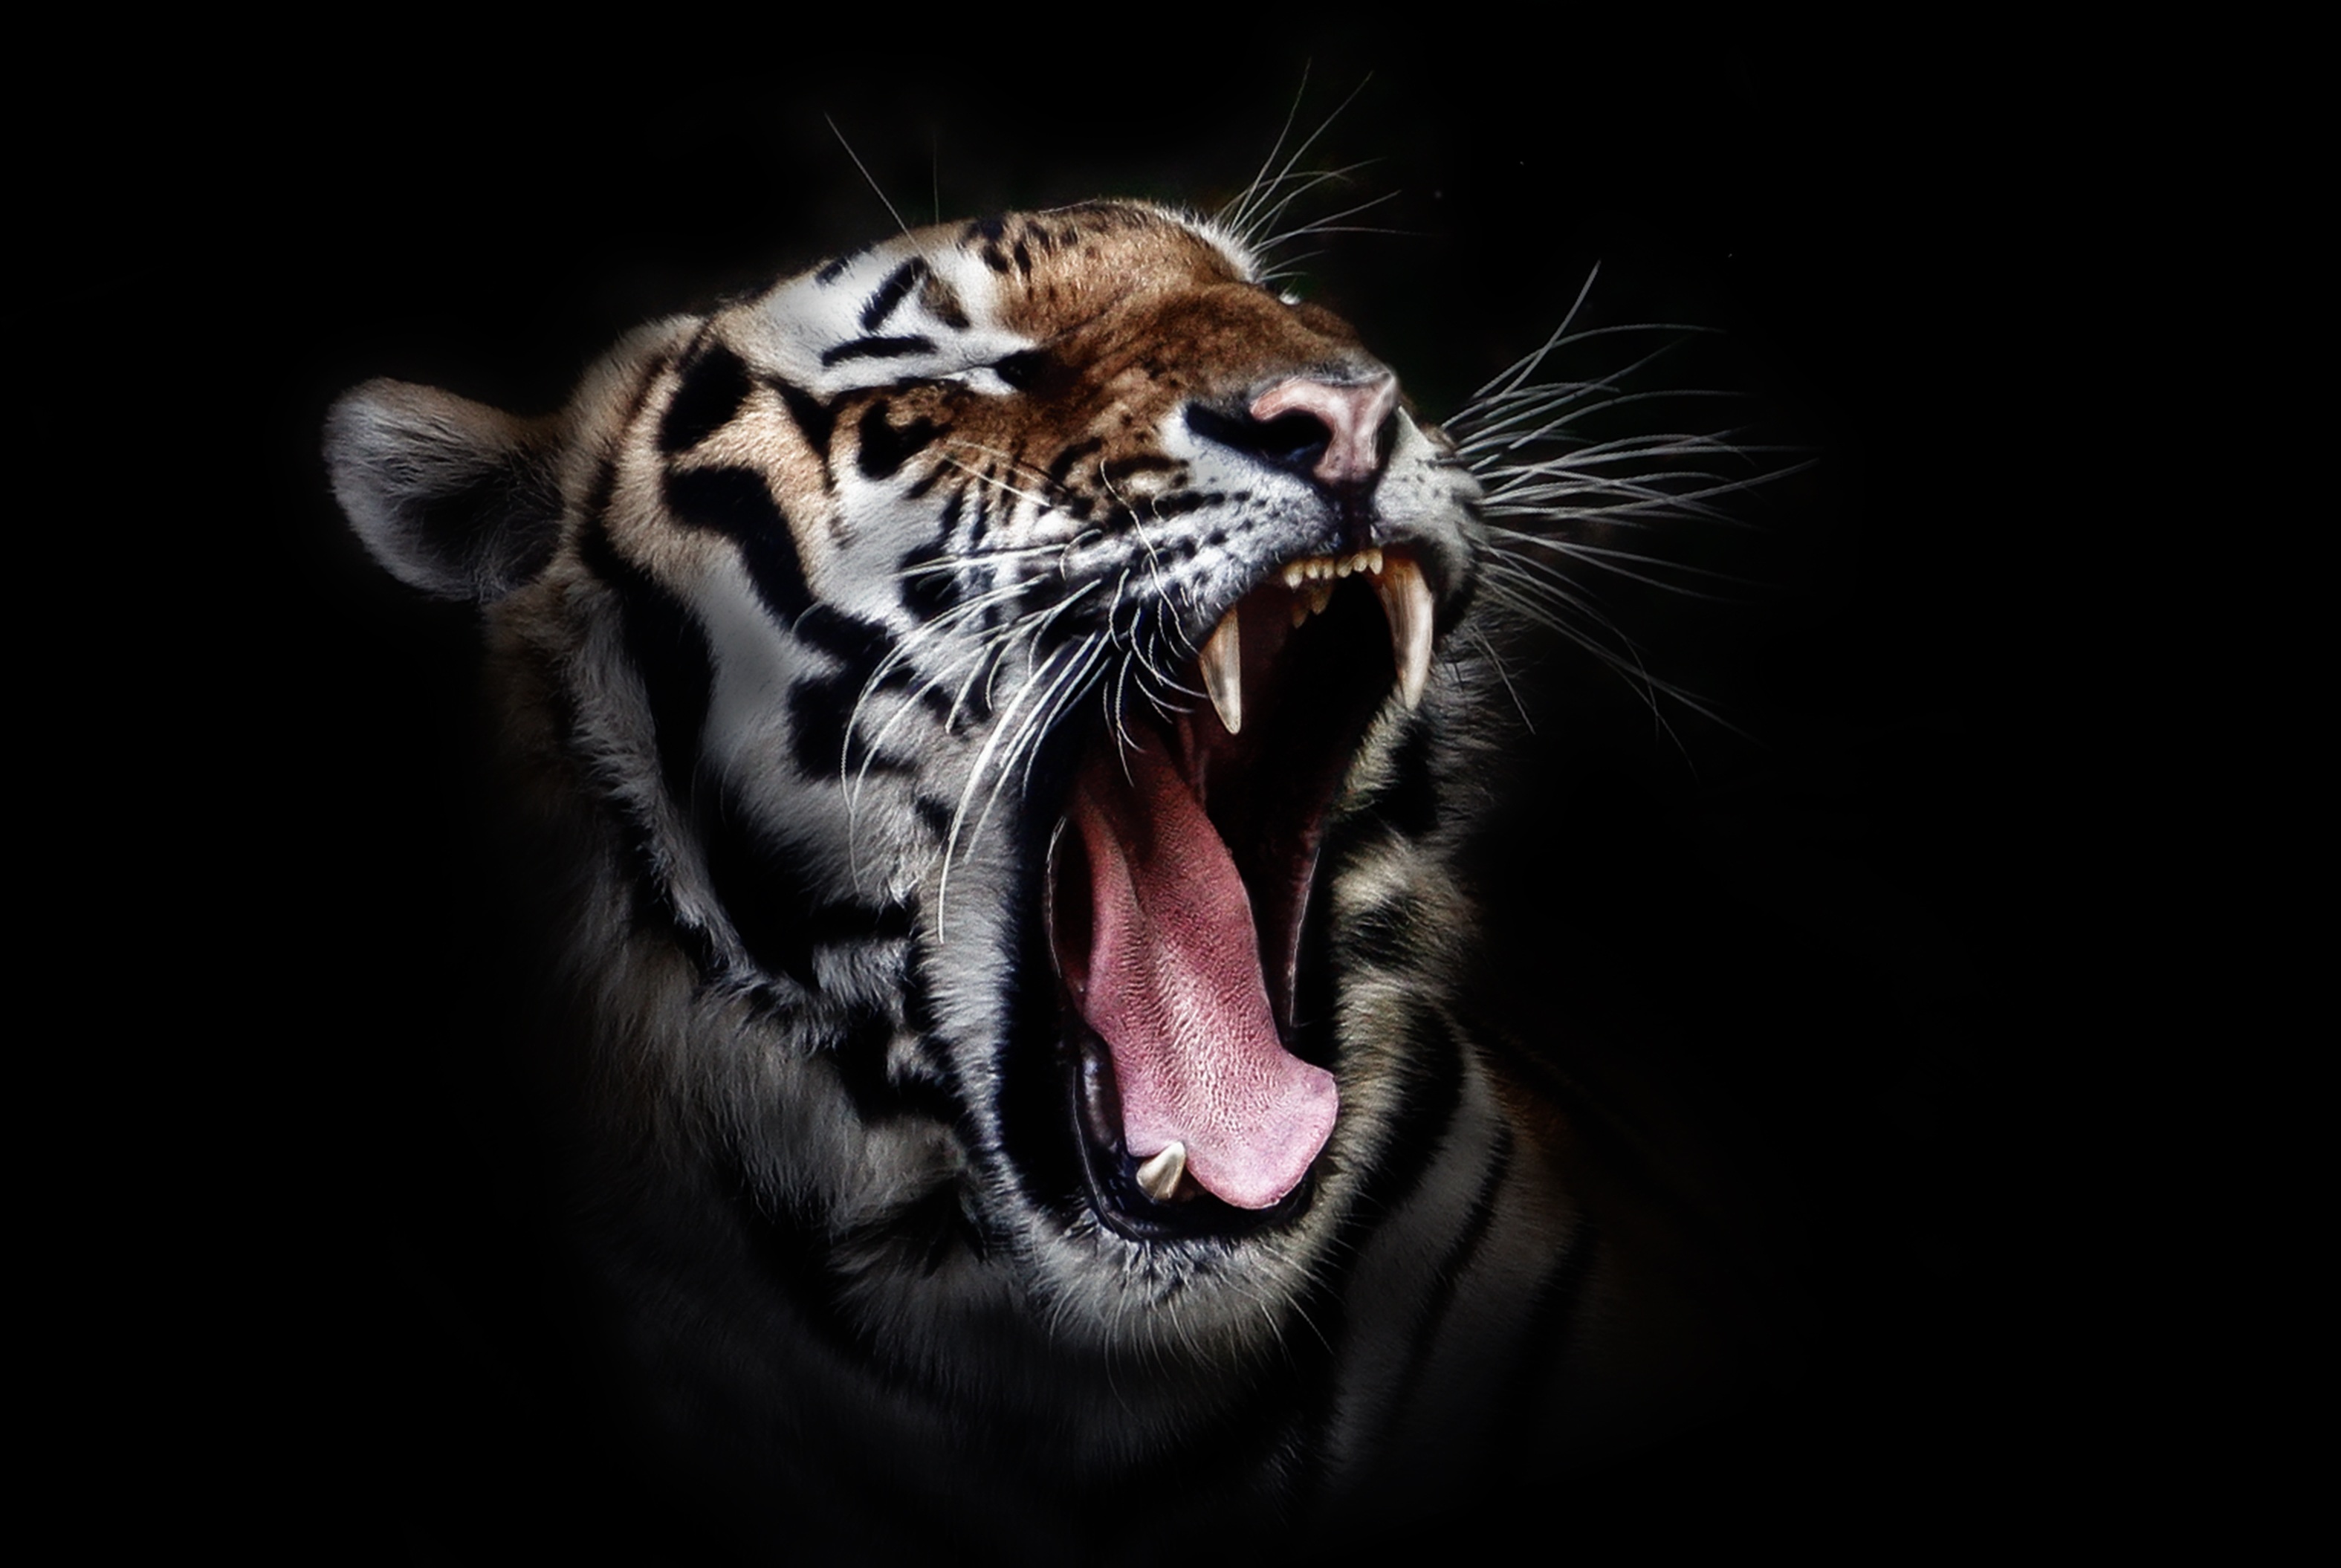 Free photo A tiger yawning on a black background